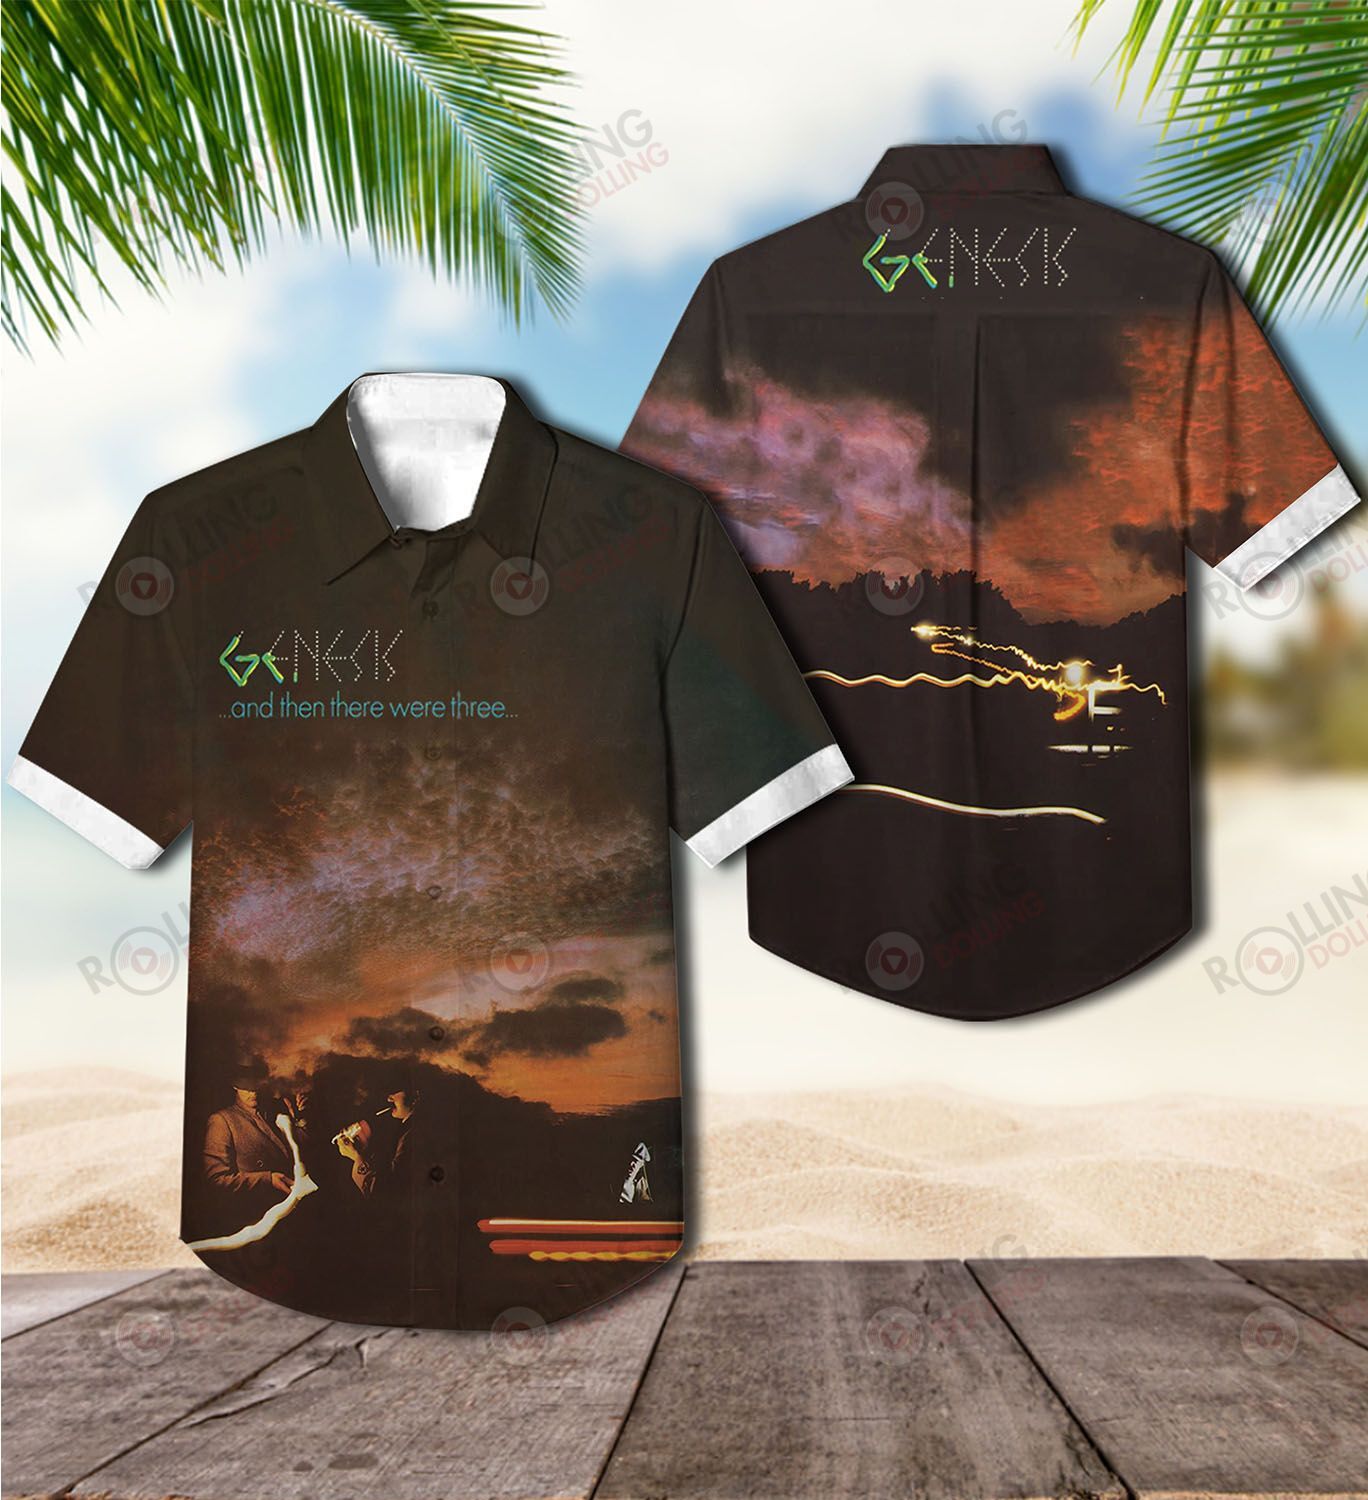 The Hawaiian Shirt is a popular shirt that is worn by Rock band fans 79